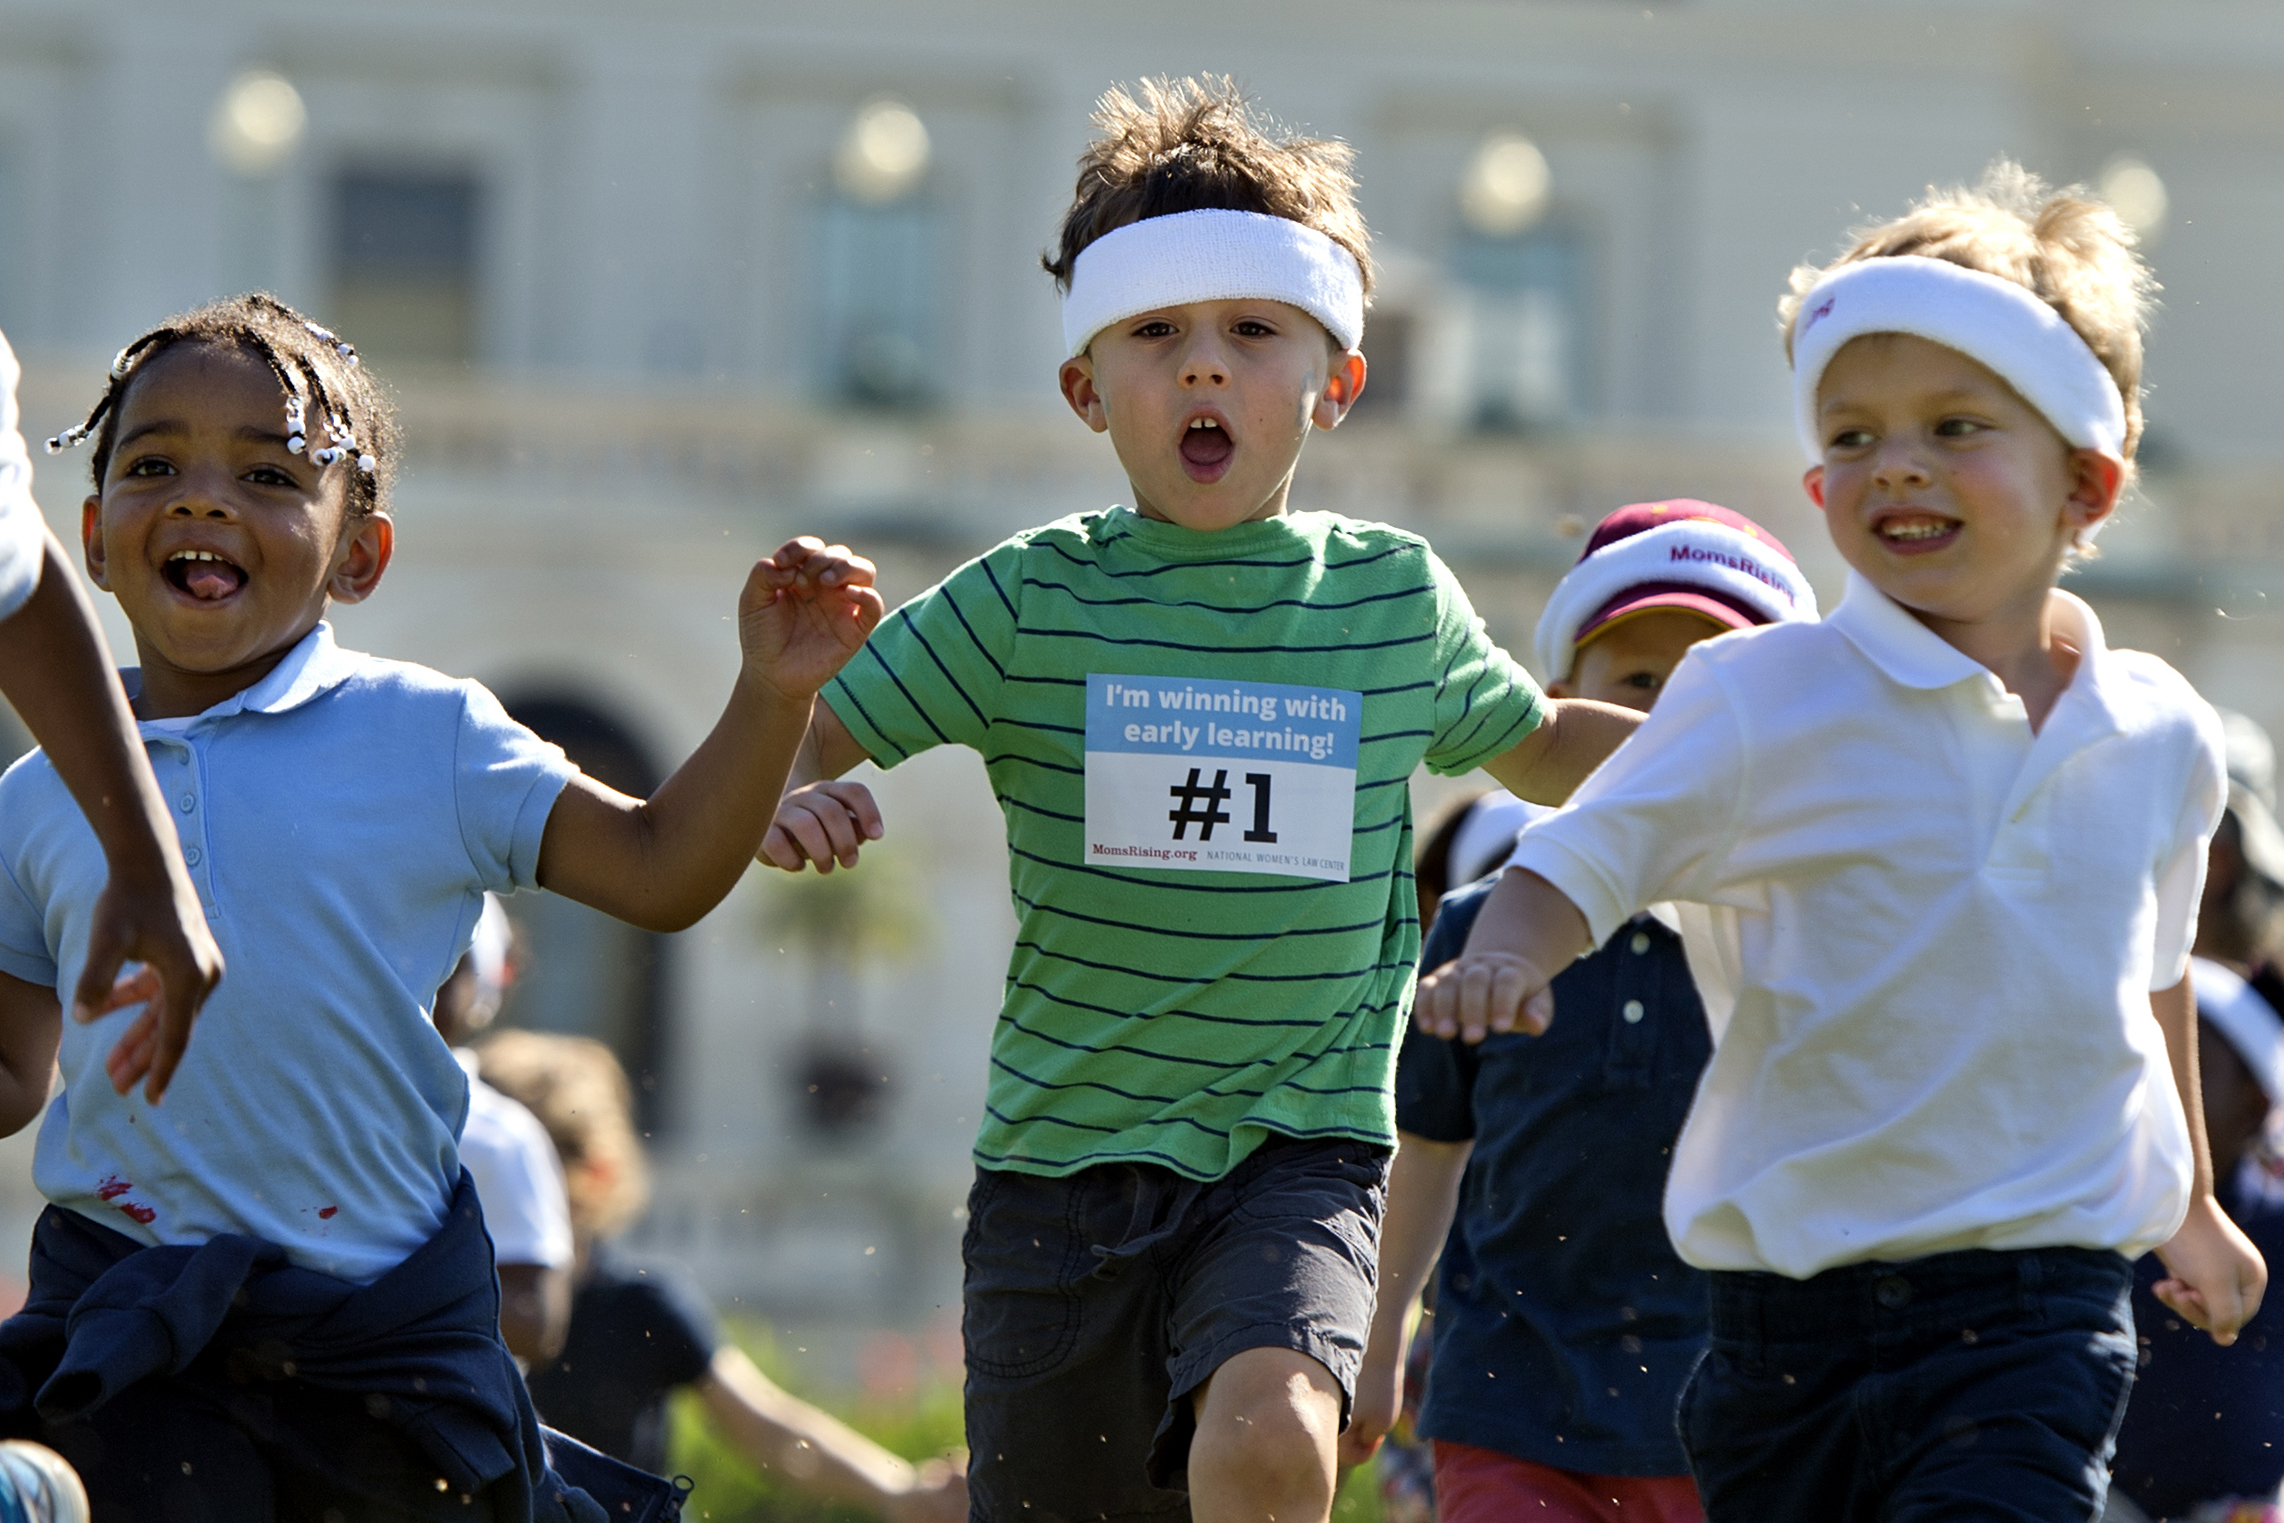 Children run a relay race during an event sponsored by co-hosted by MomsRising and the National Women’s Law Center to highlight the importance of affordable child care and early learning programs on Sept. 17, 2015. (Tom Williams—CQ-Roll Call/Getty Images)